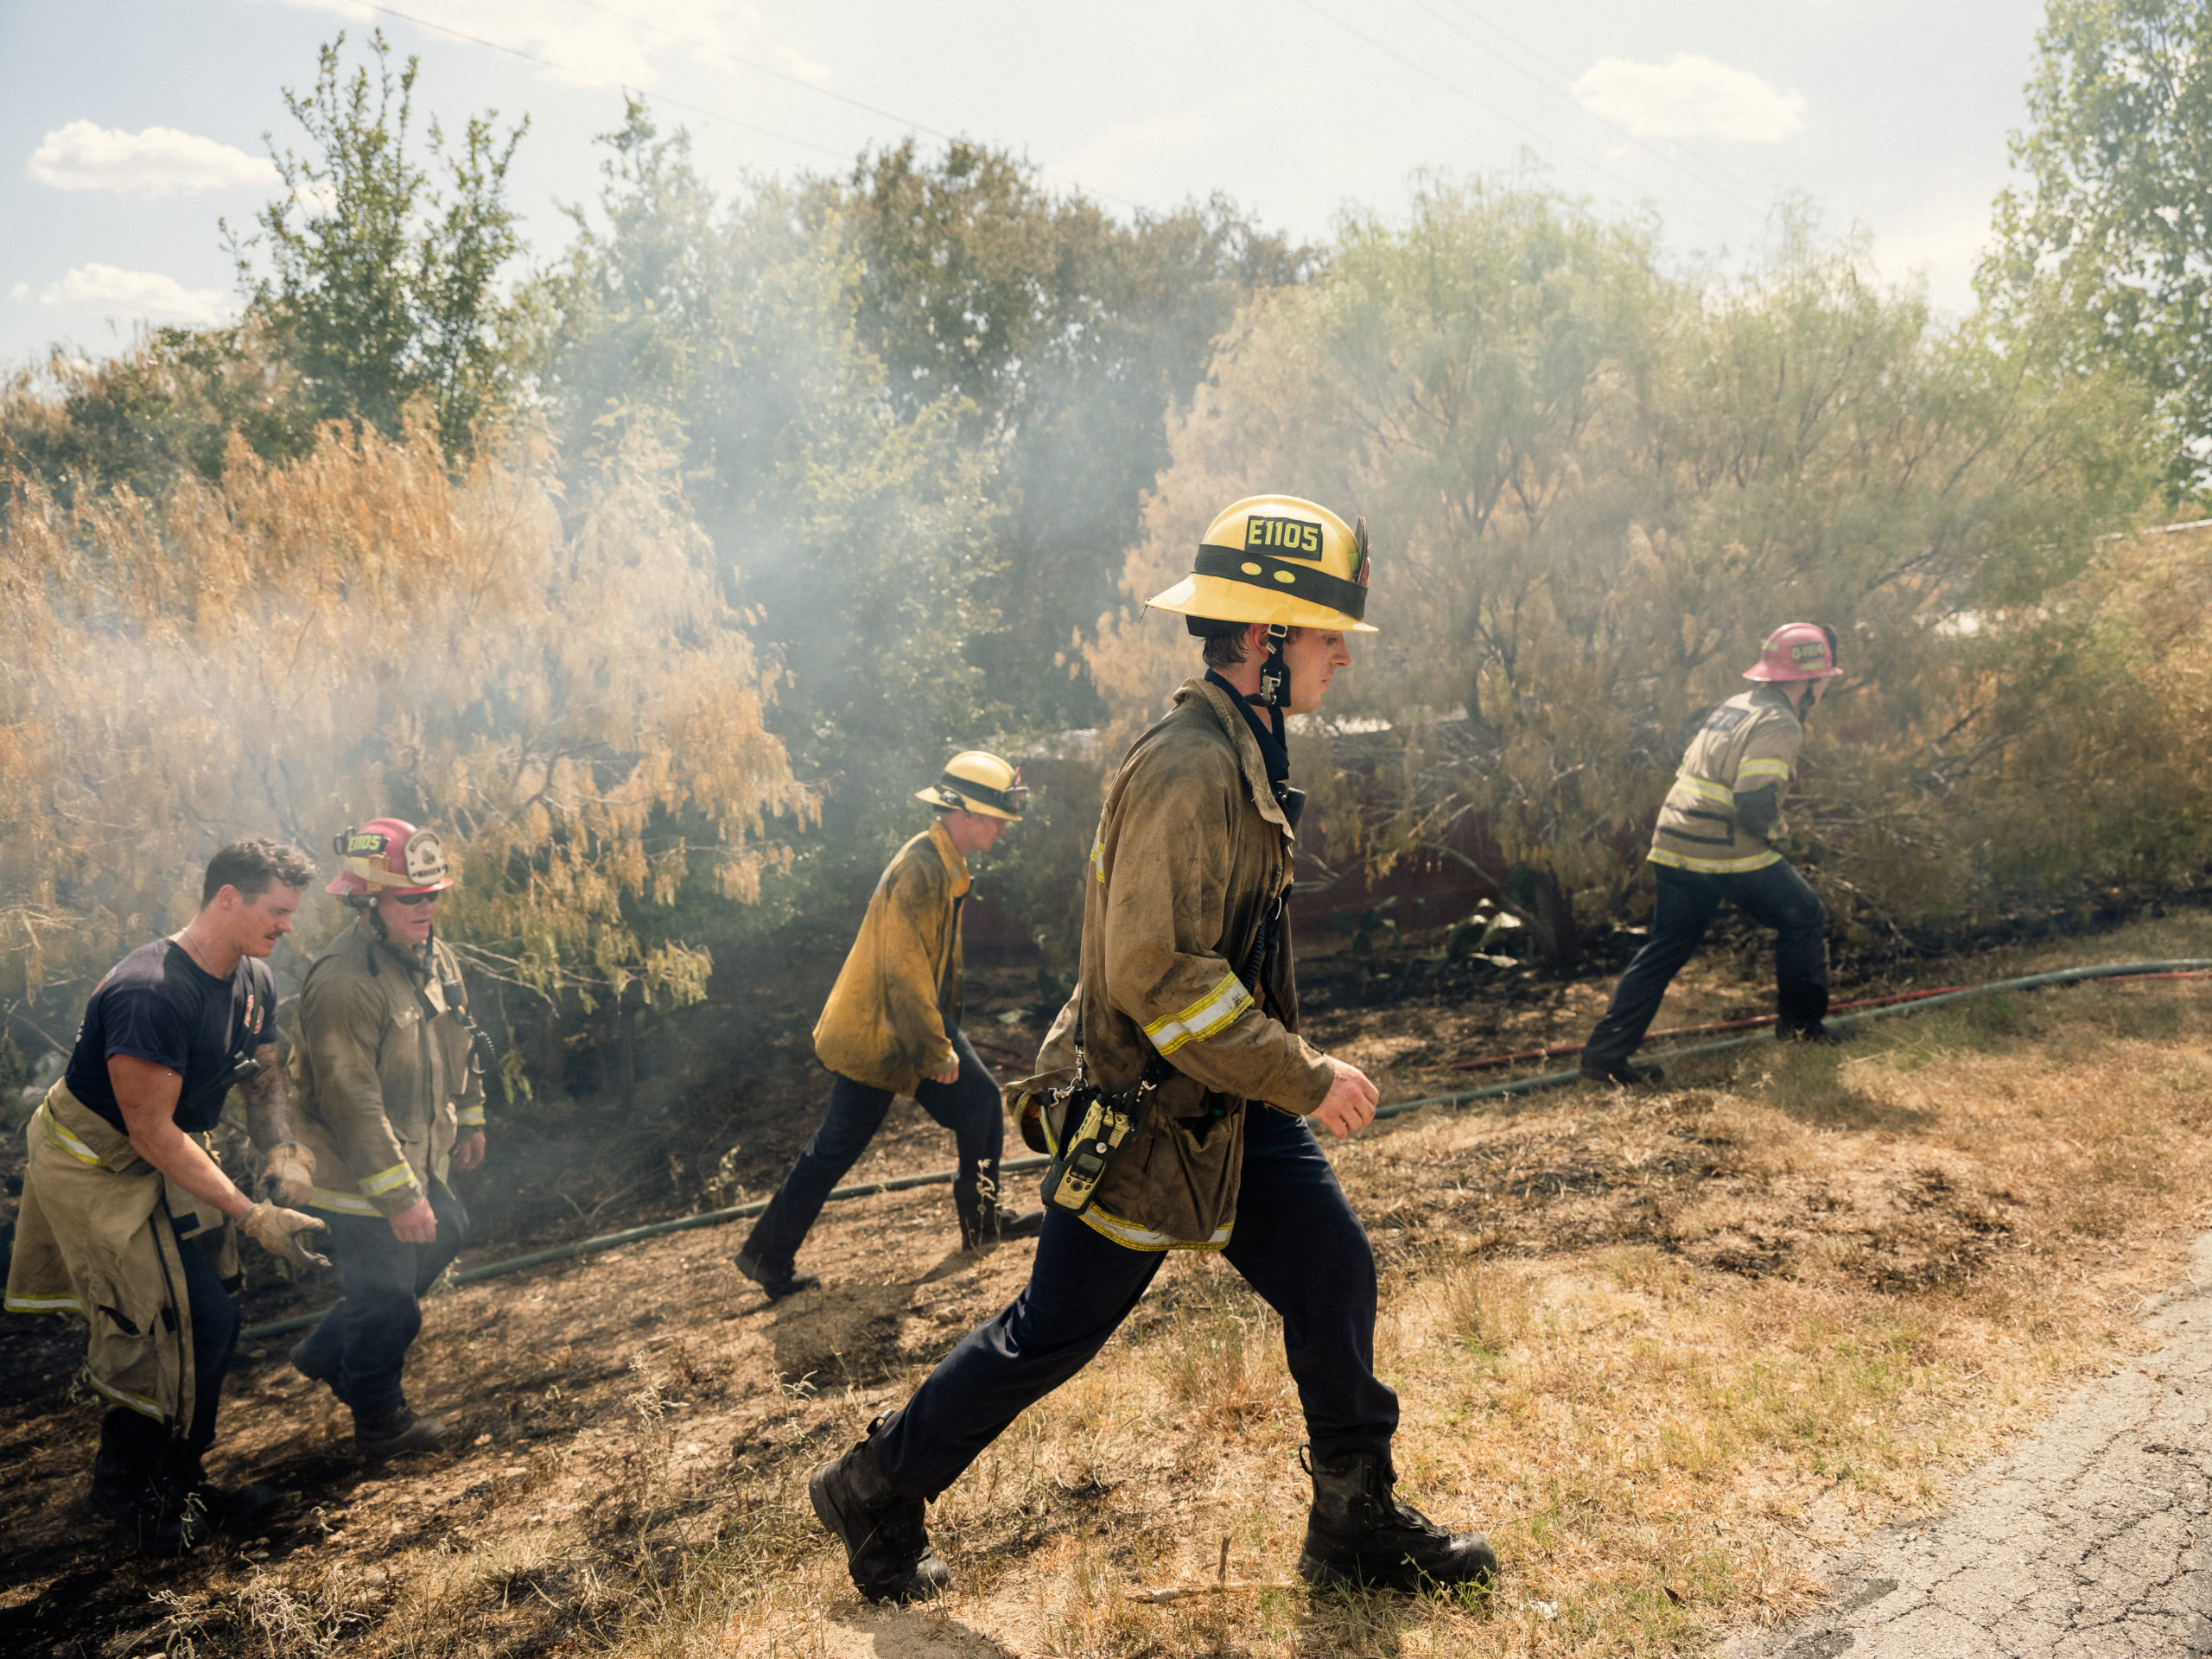 A crew of firefighters in uniform carry their gear up a steep, smoky hill.